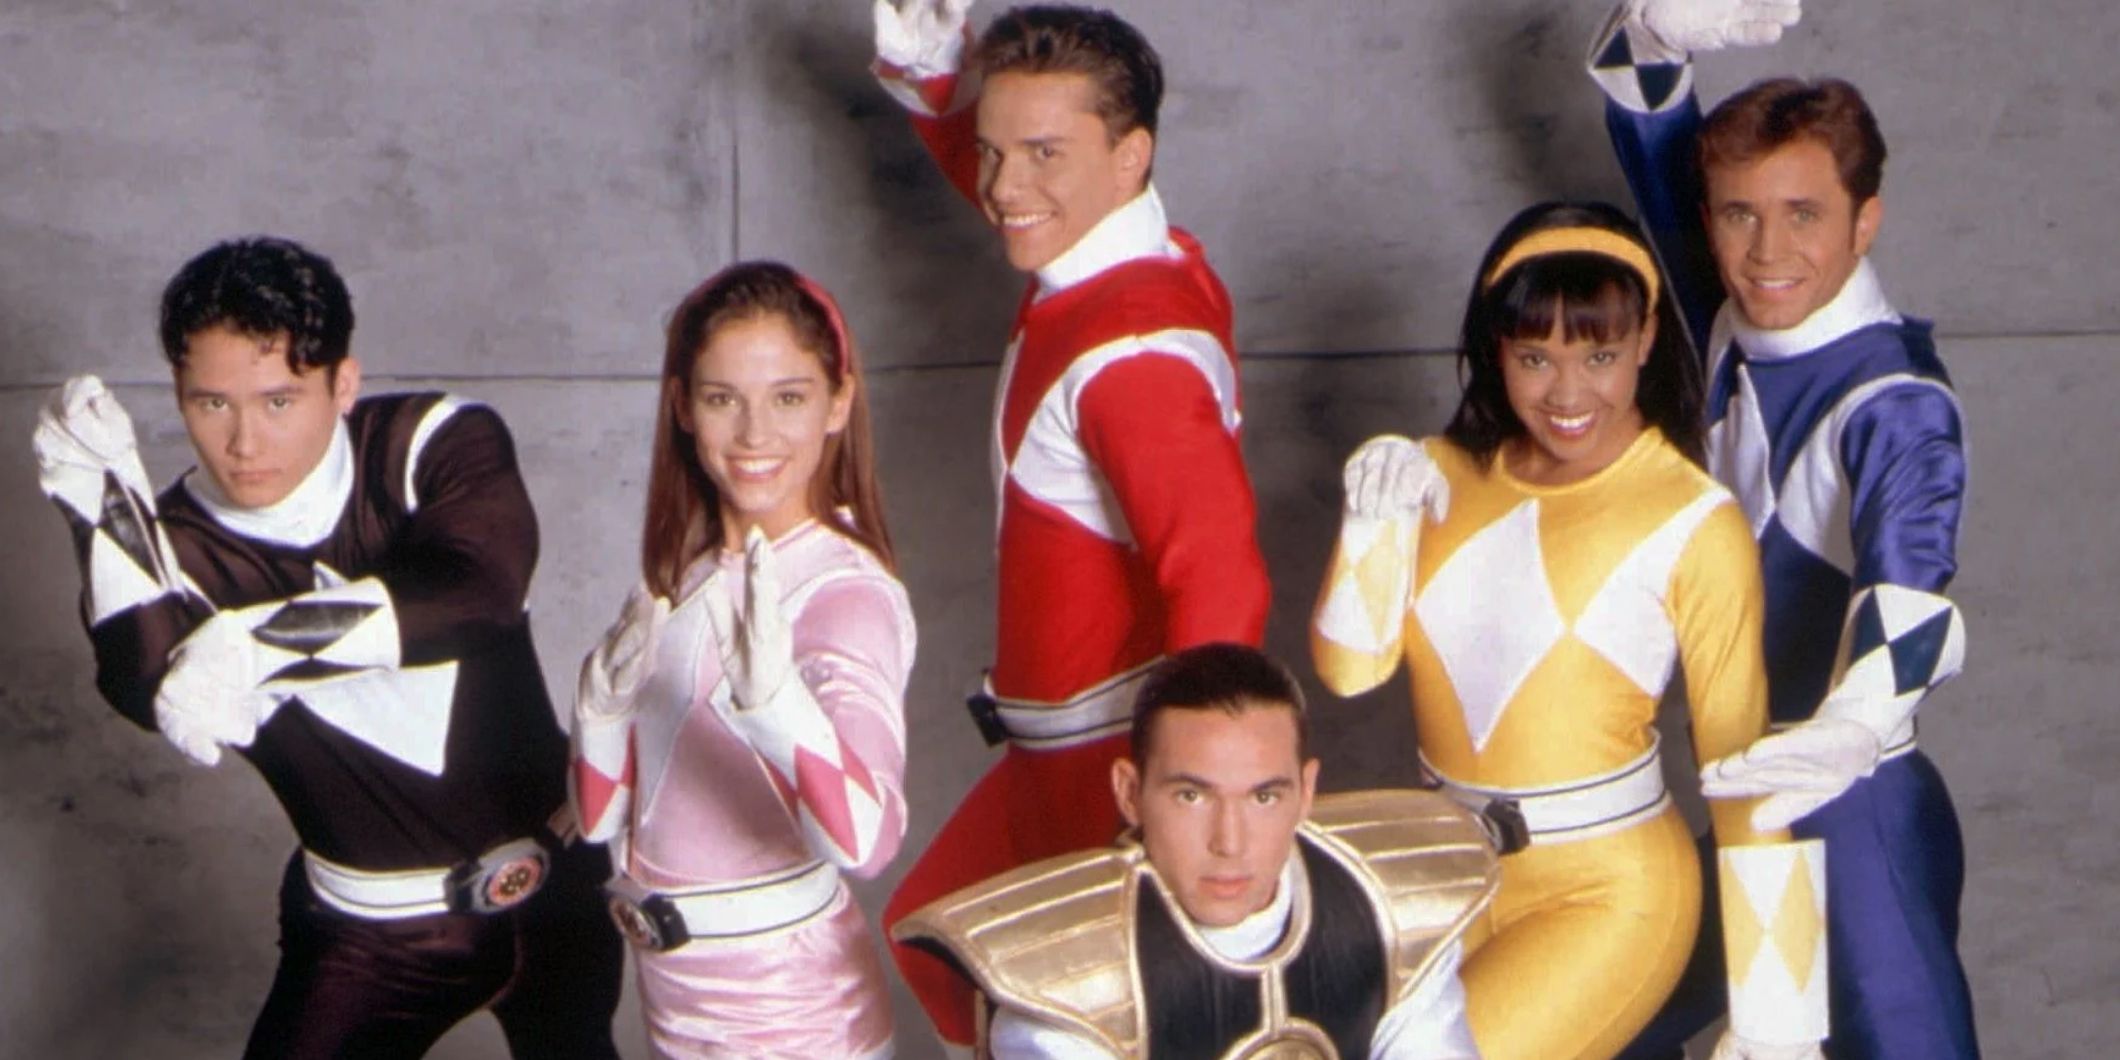 Mighty Morphin Power Rangers The Movie Cast